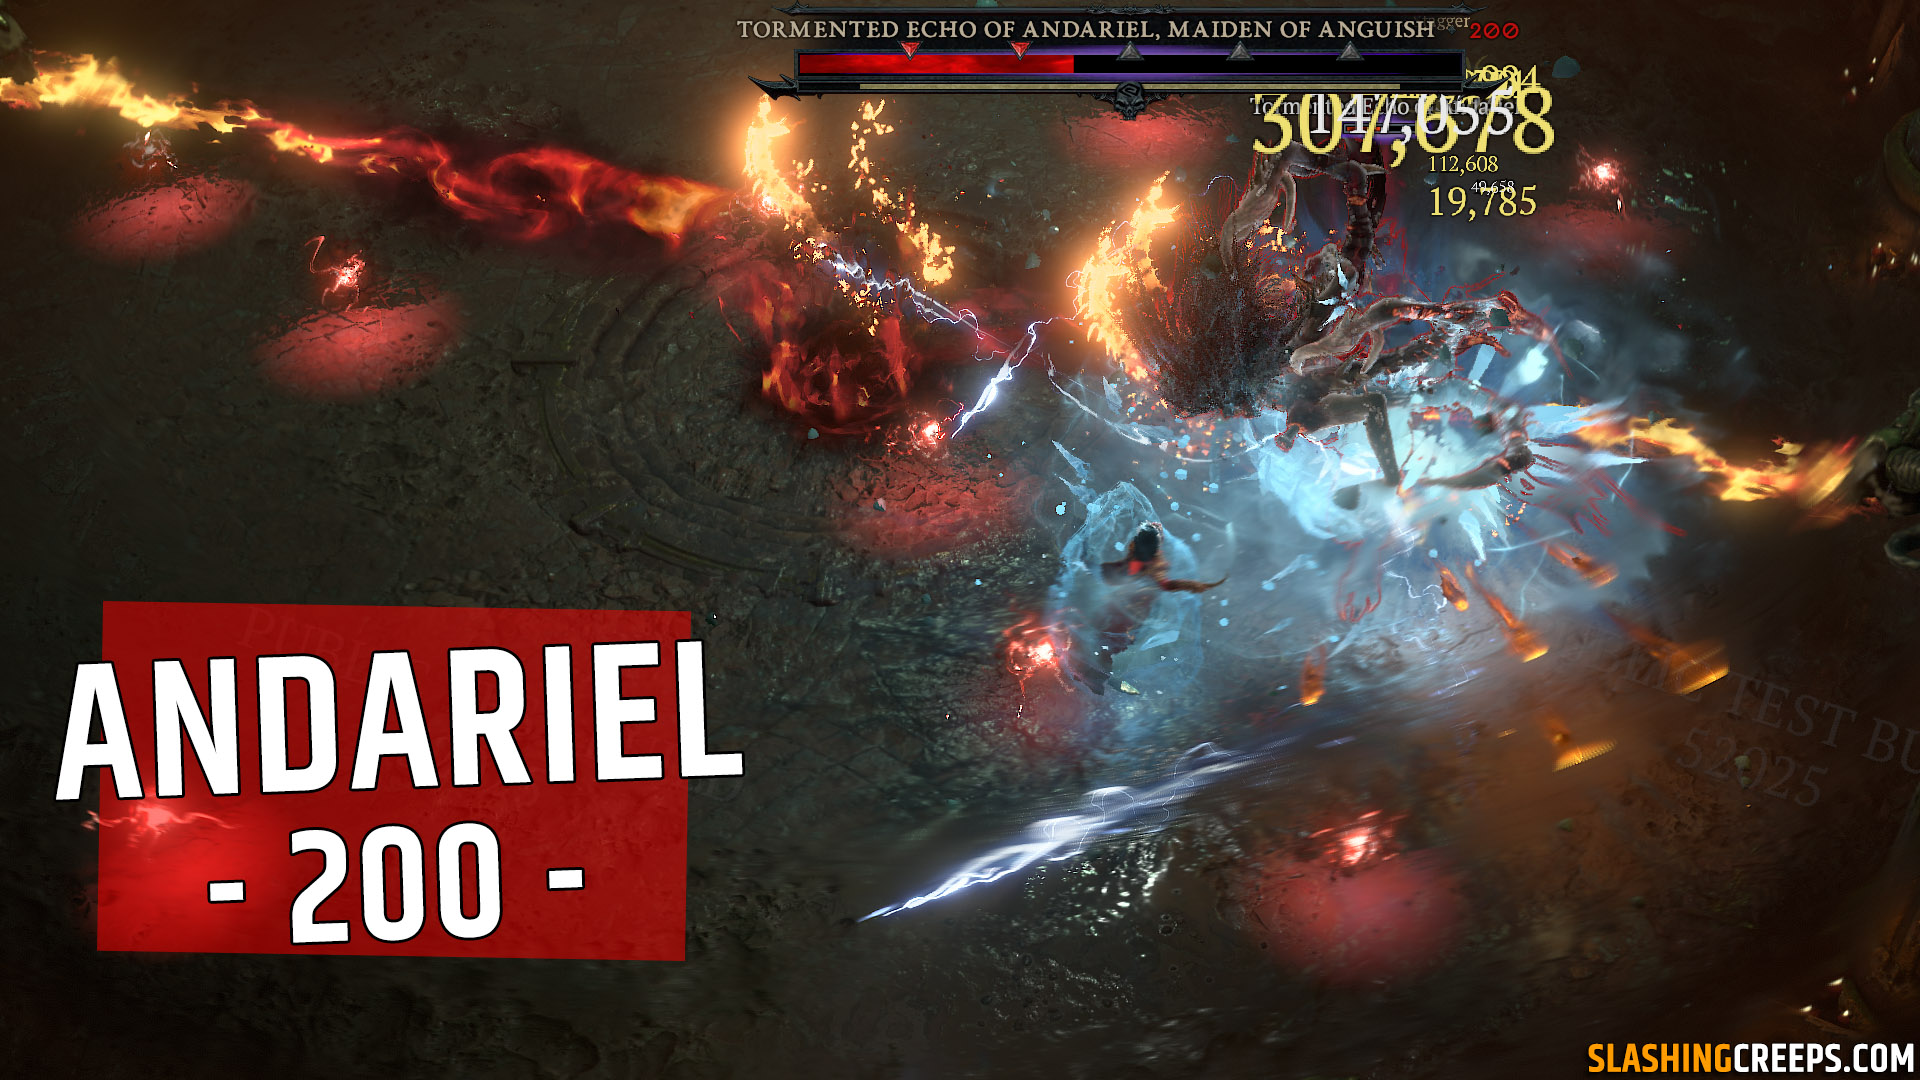 Tormented Echo Uber Andariel 200 Diablo 4 Patch 1.4, guide and full gameplay